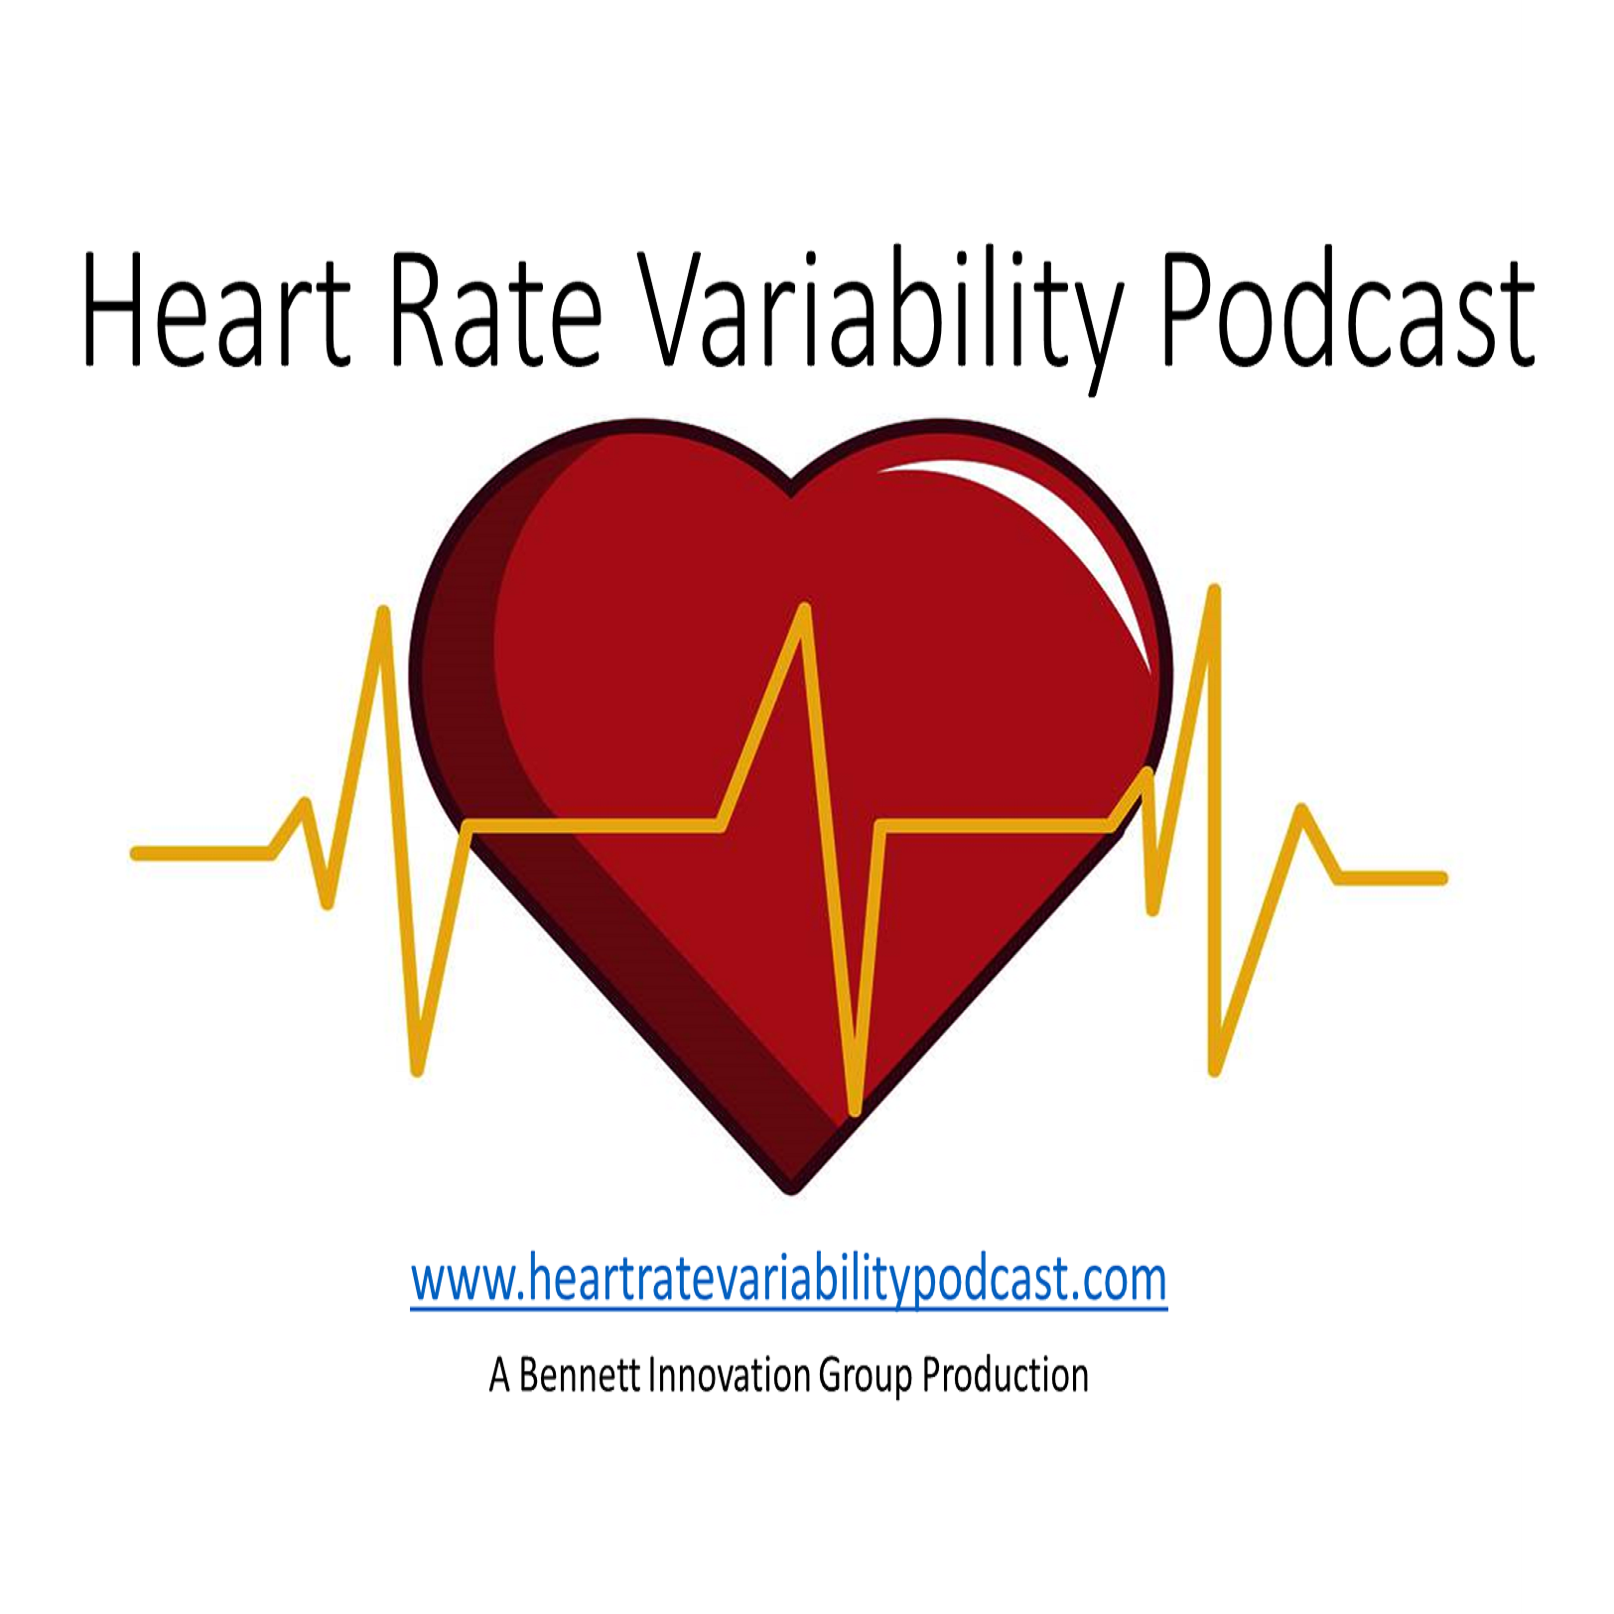 What is Heart Rate Variability